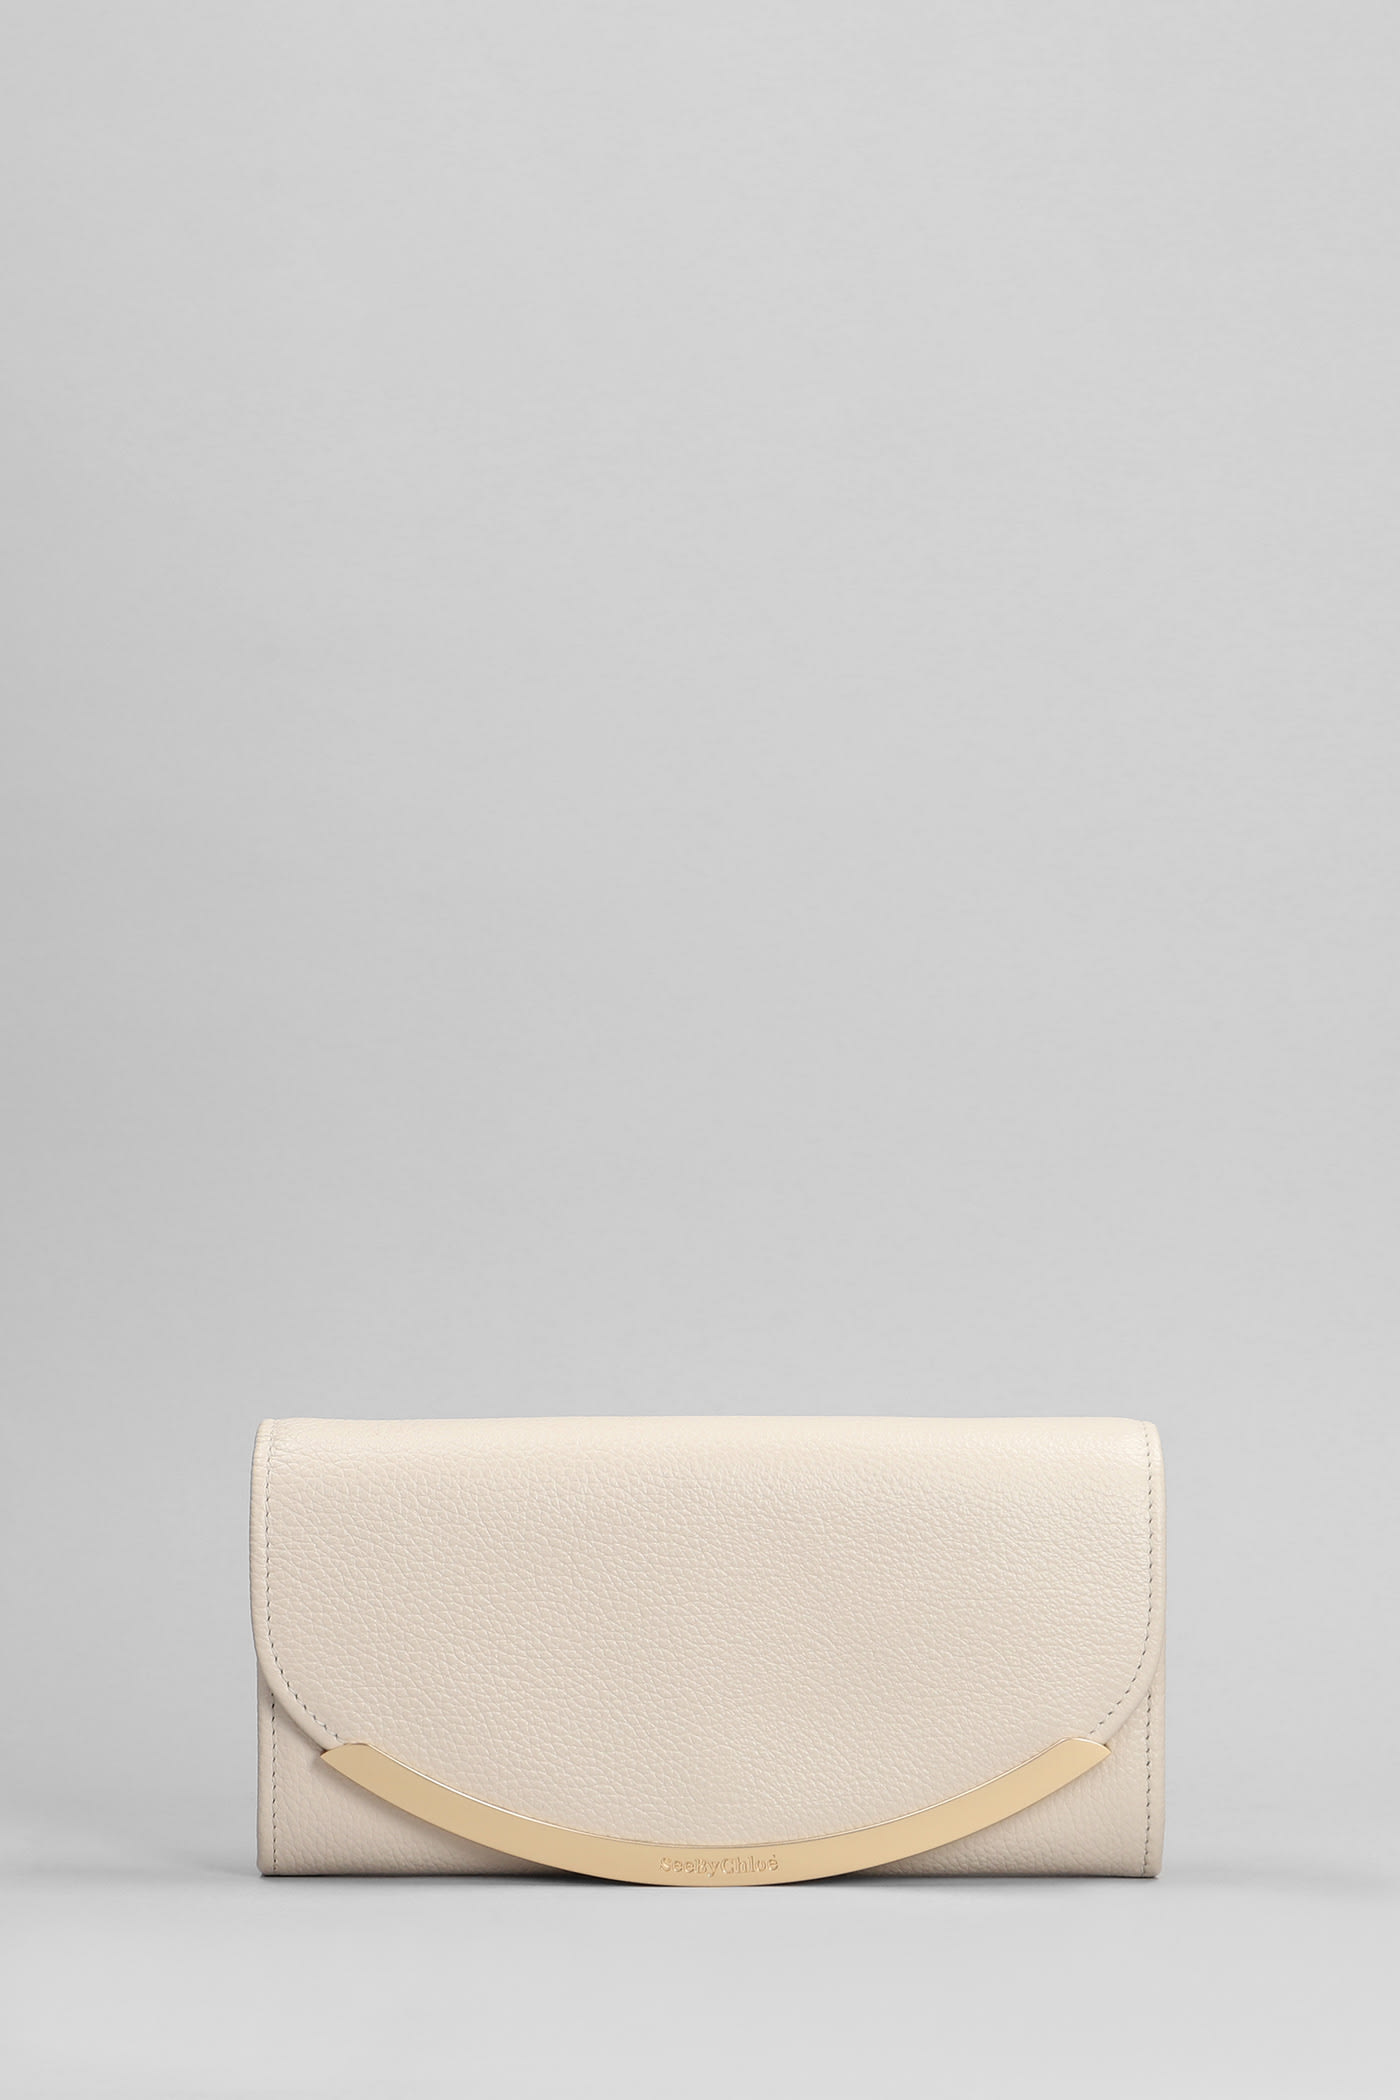 See by Chloé Lizzie Wallet In Beige Leather